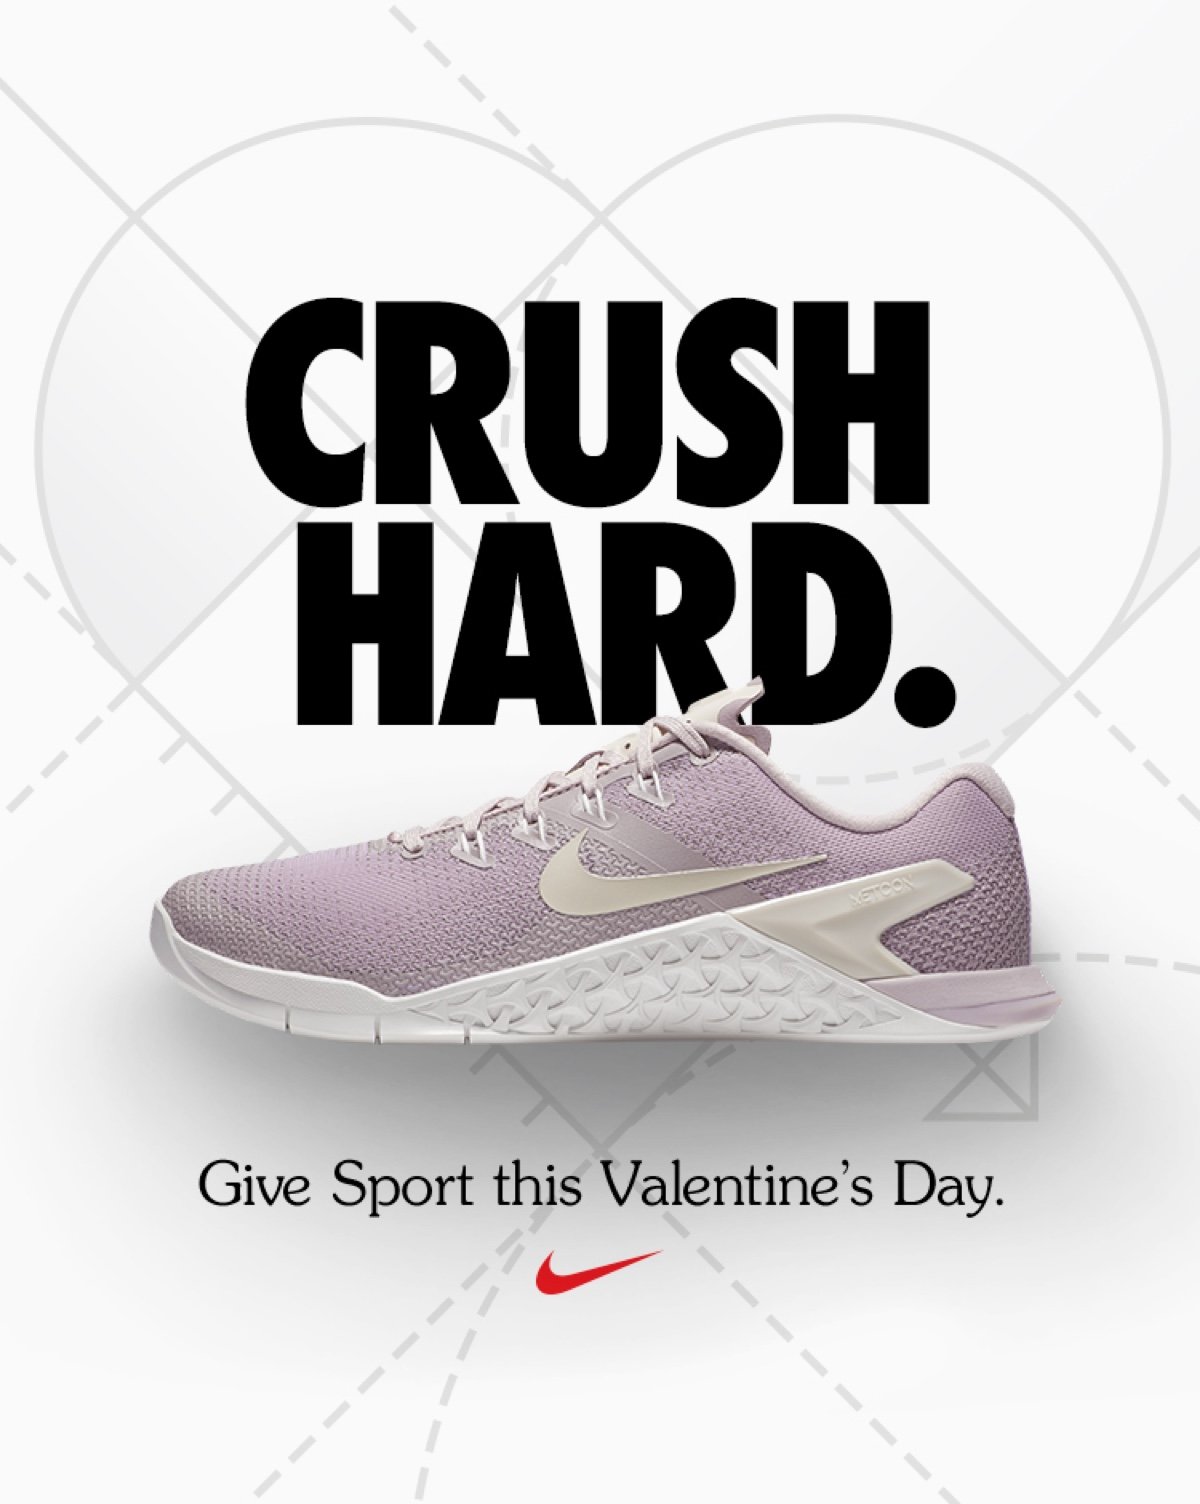 love is in the air nike